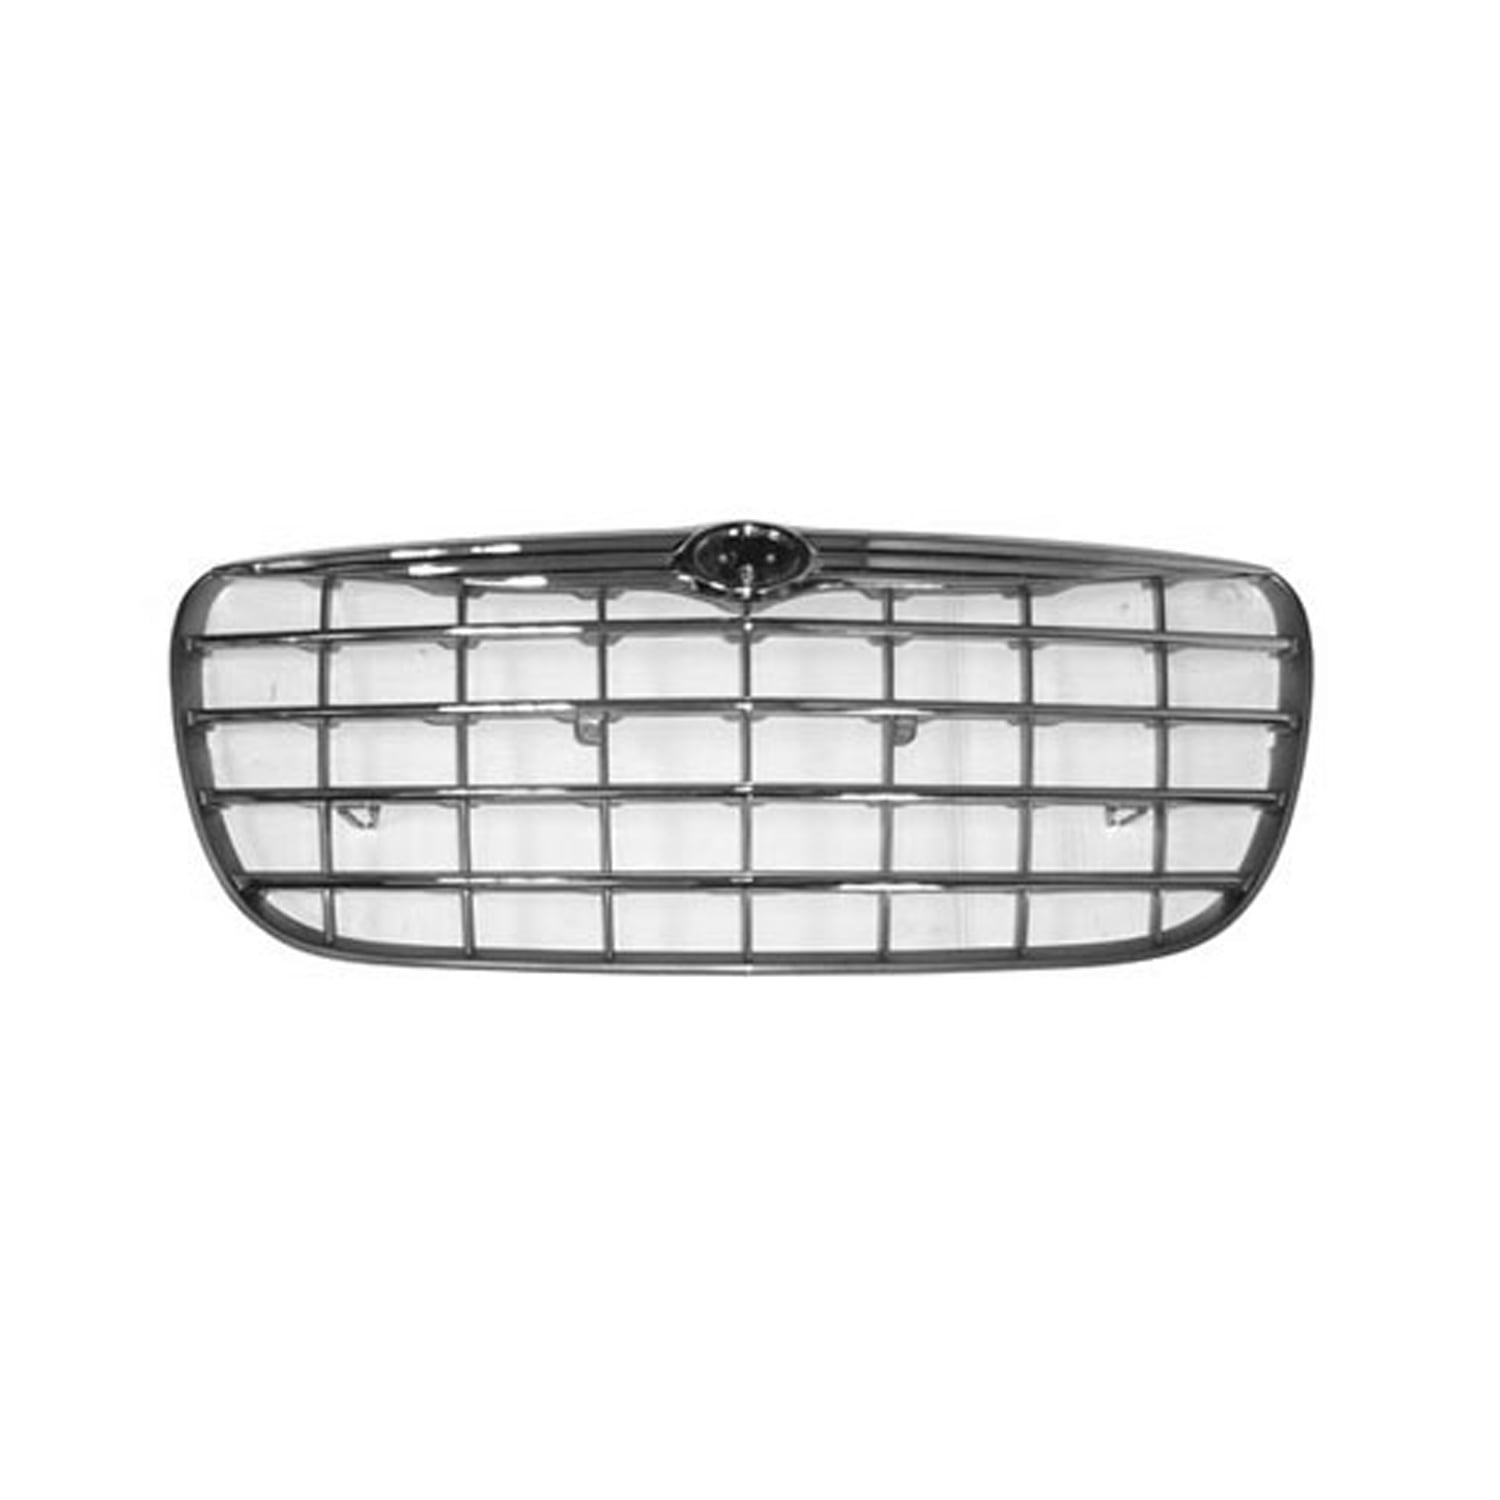 New Standard Replacement Front Grille, Fits 20042006